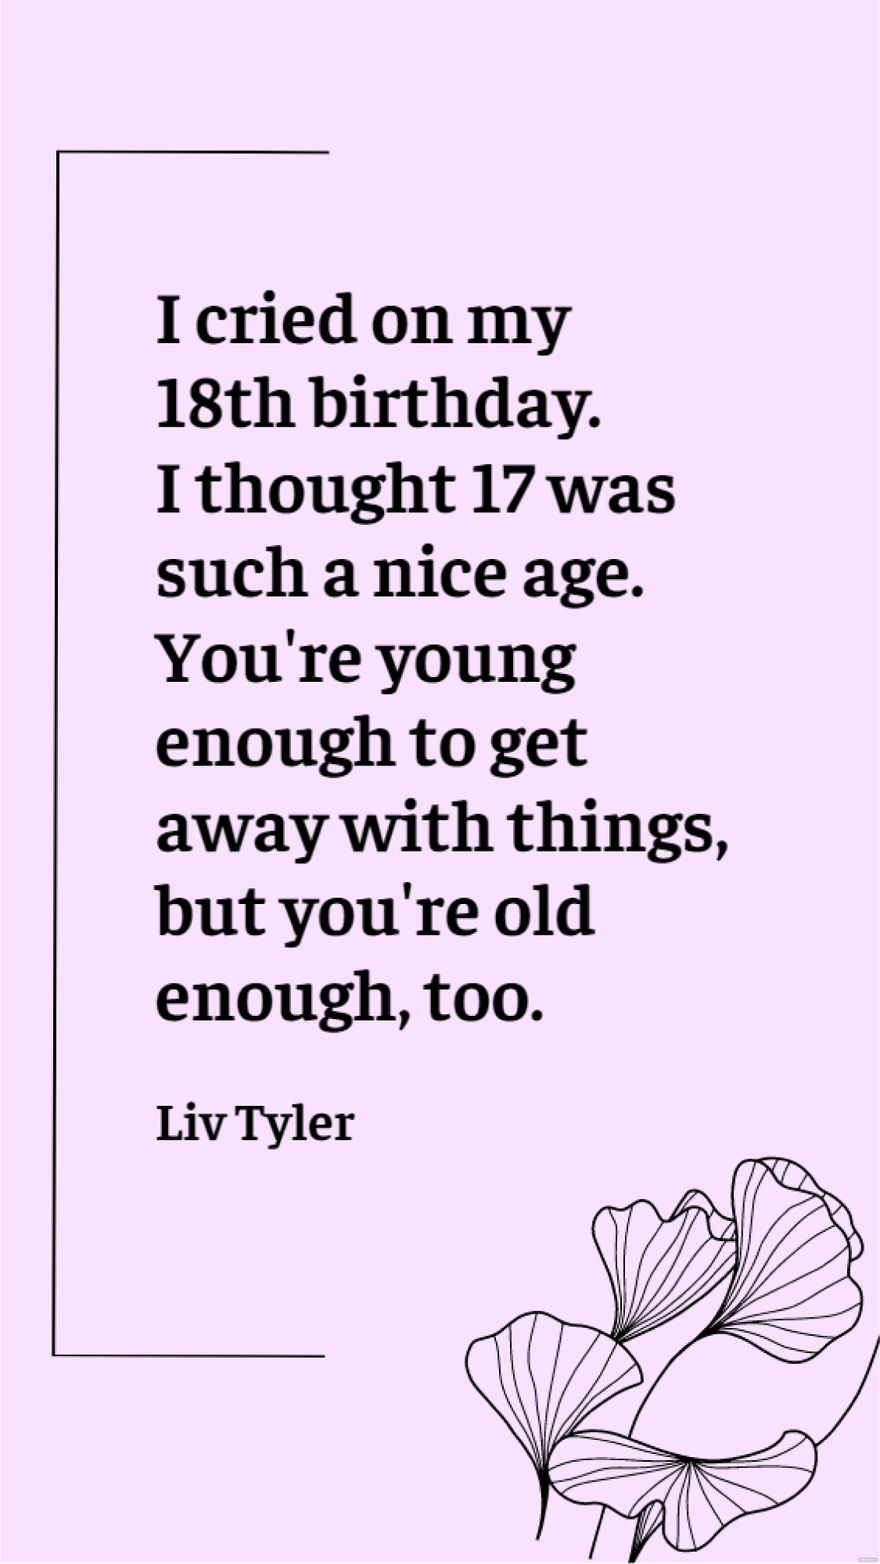 Liv Tyler - I cried on my 18th birthday. I thought 17 was such a nice age. You're young enough to get away with things, but you're old enough, too.